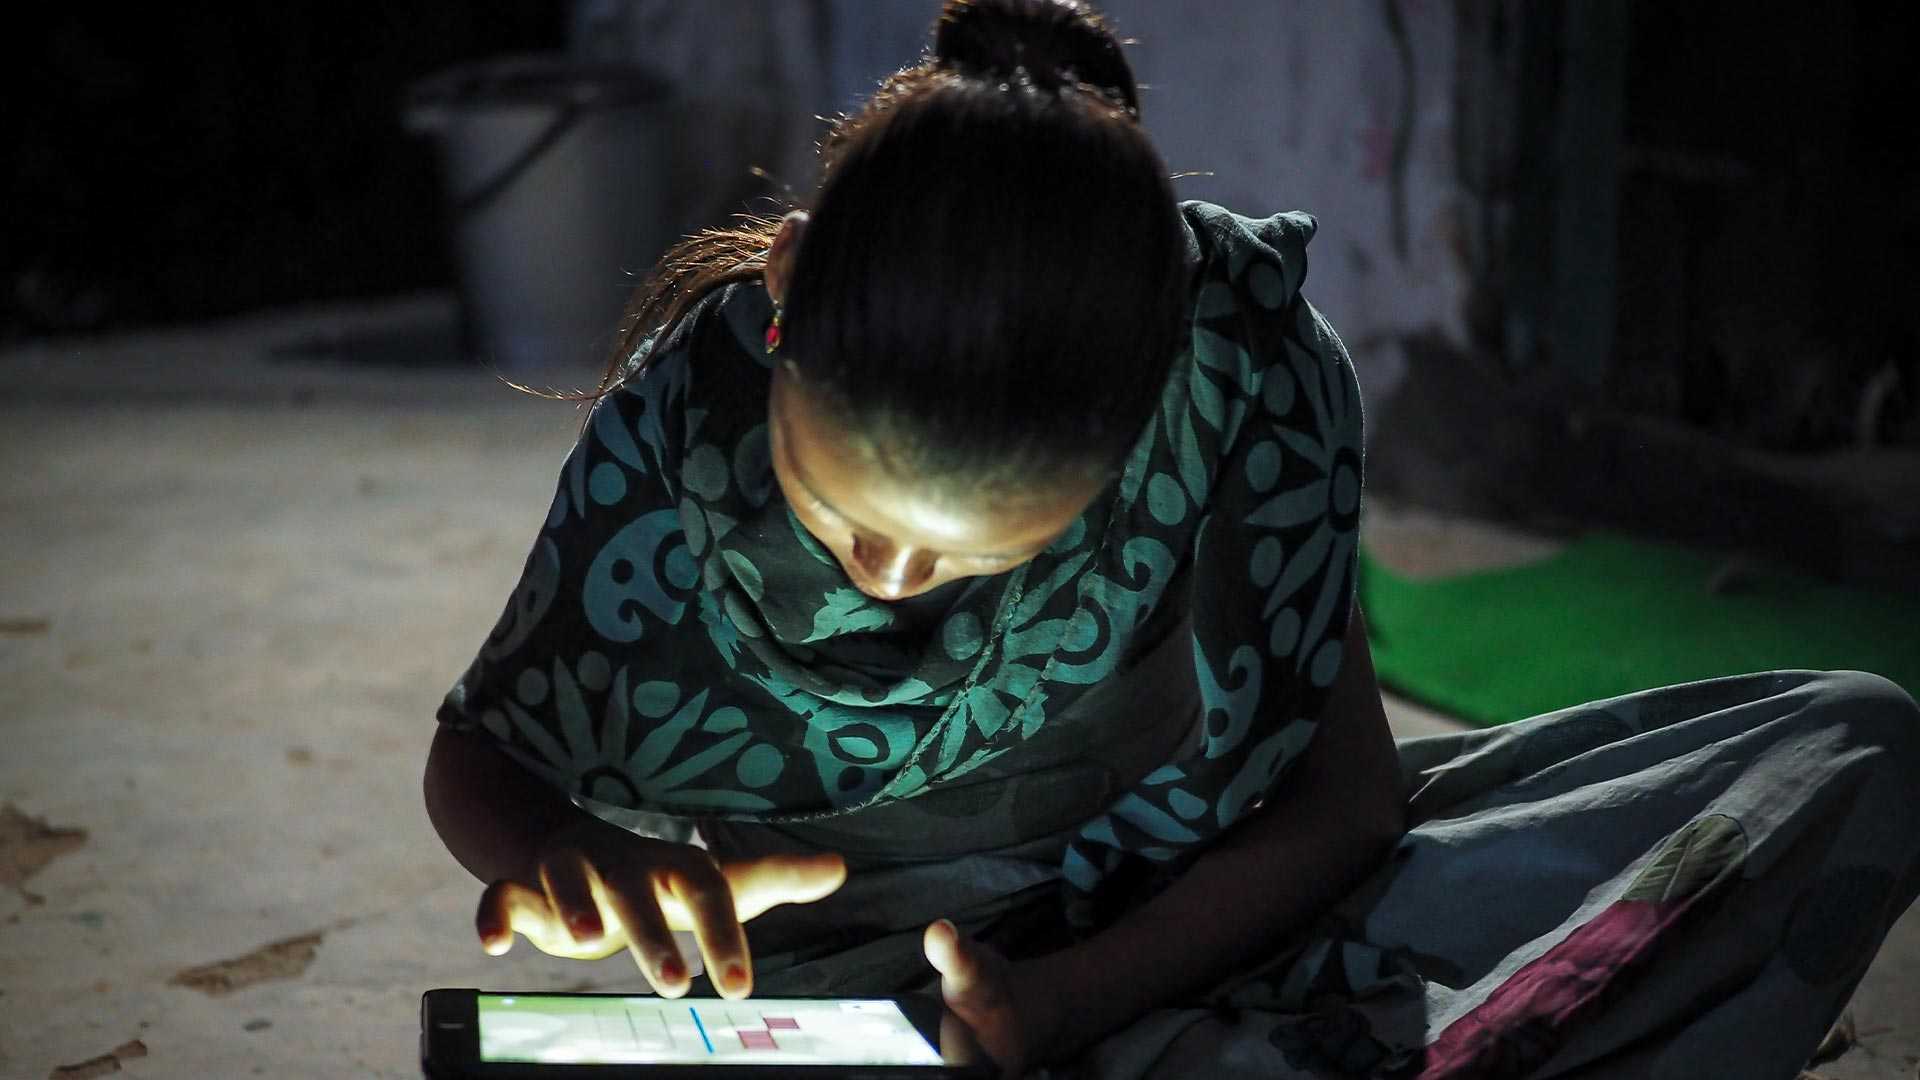 A young girl in India studying on a tablet at night